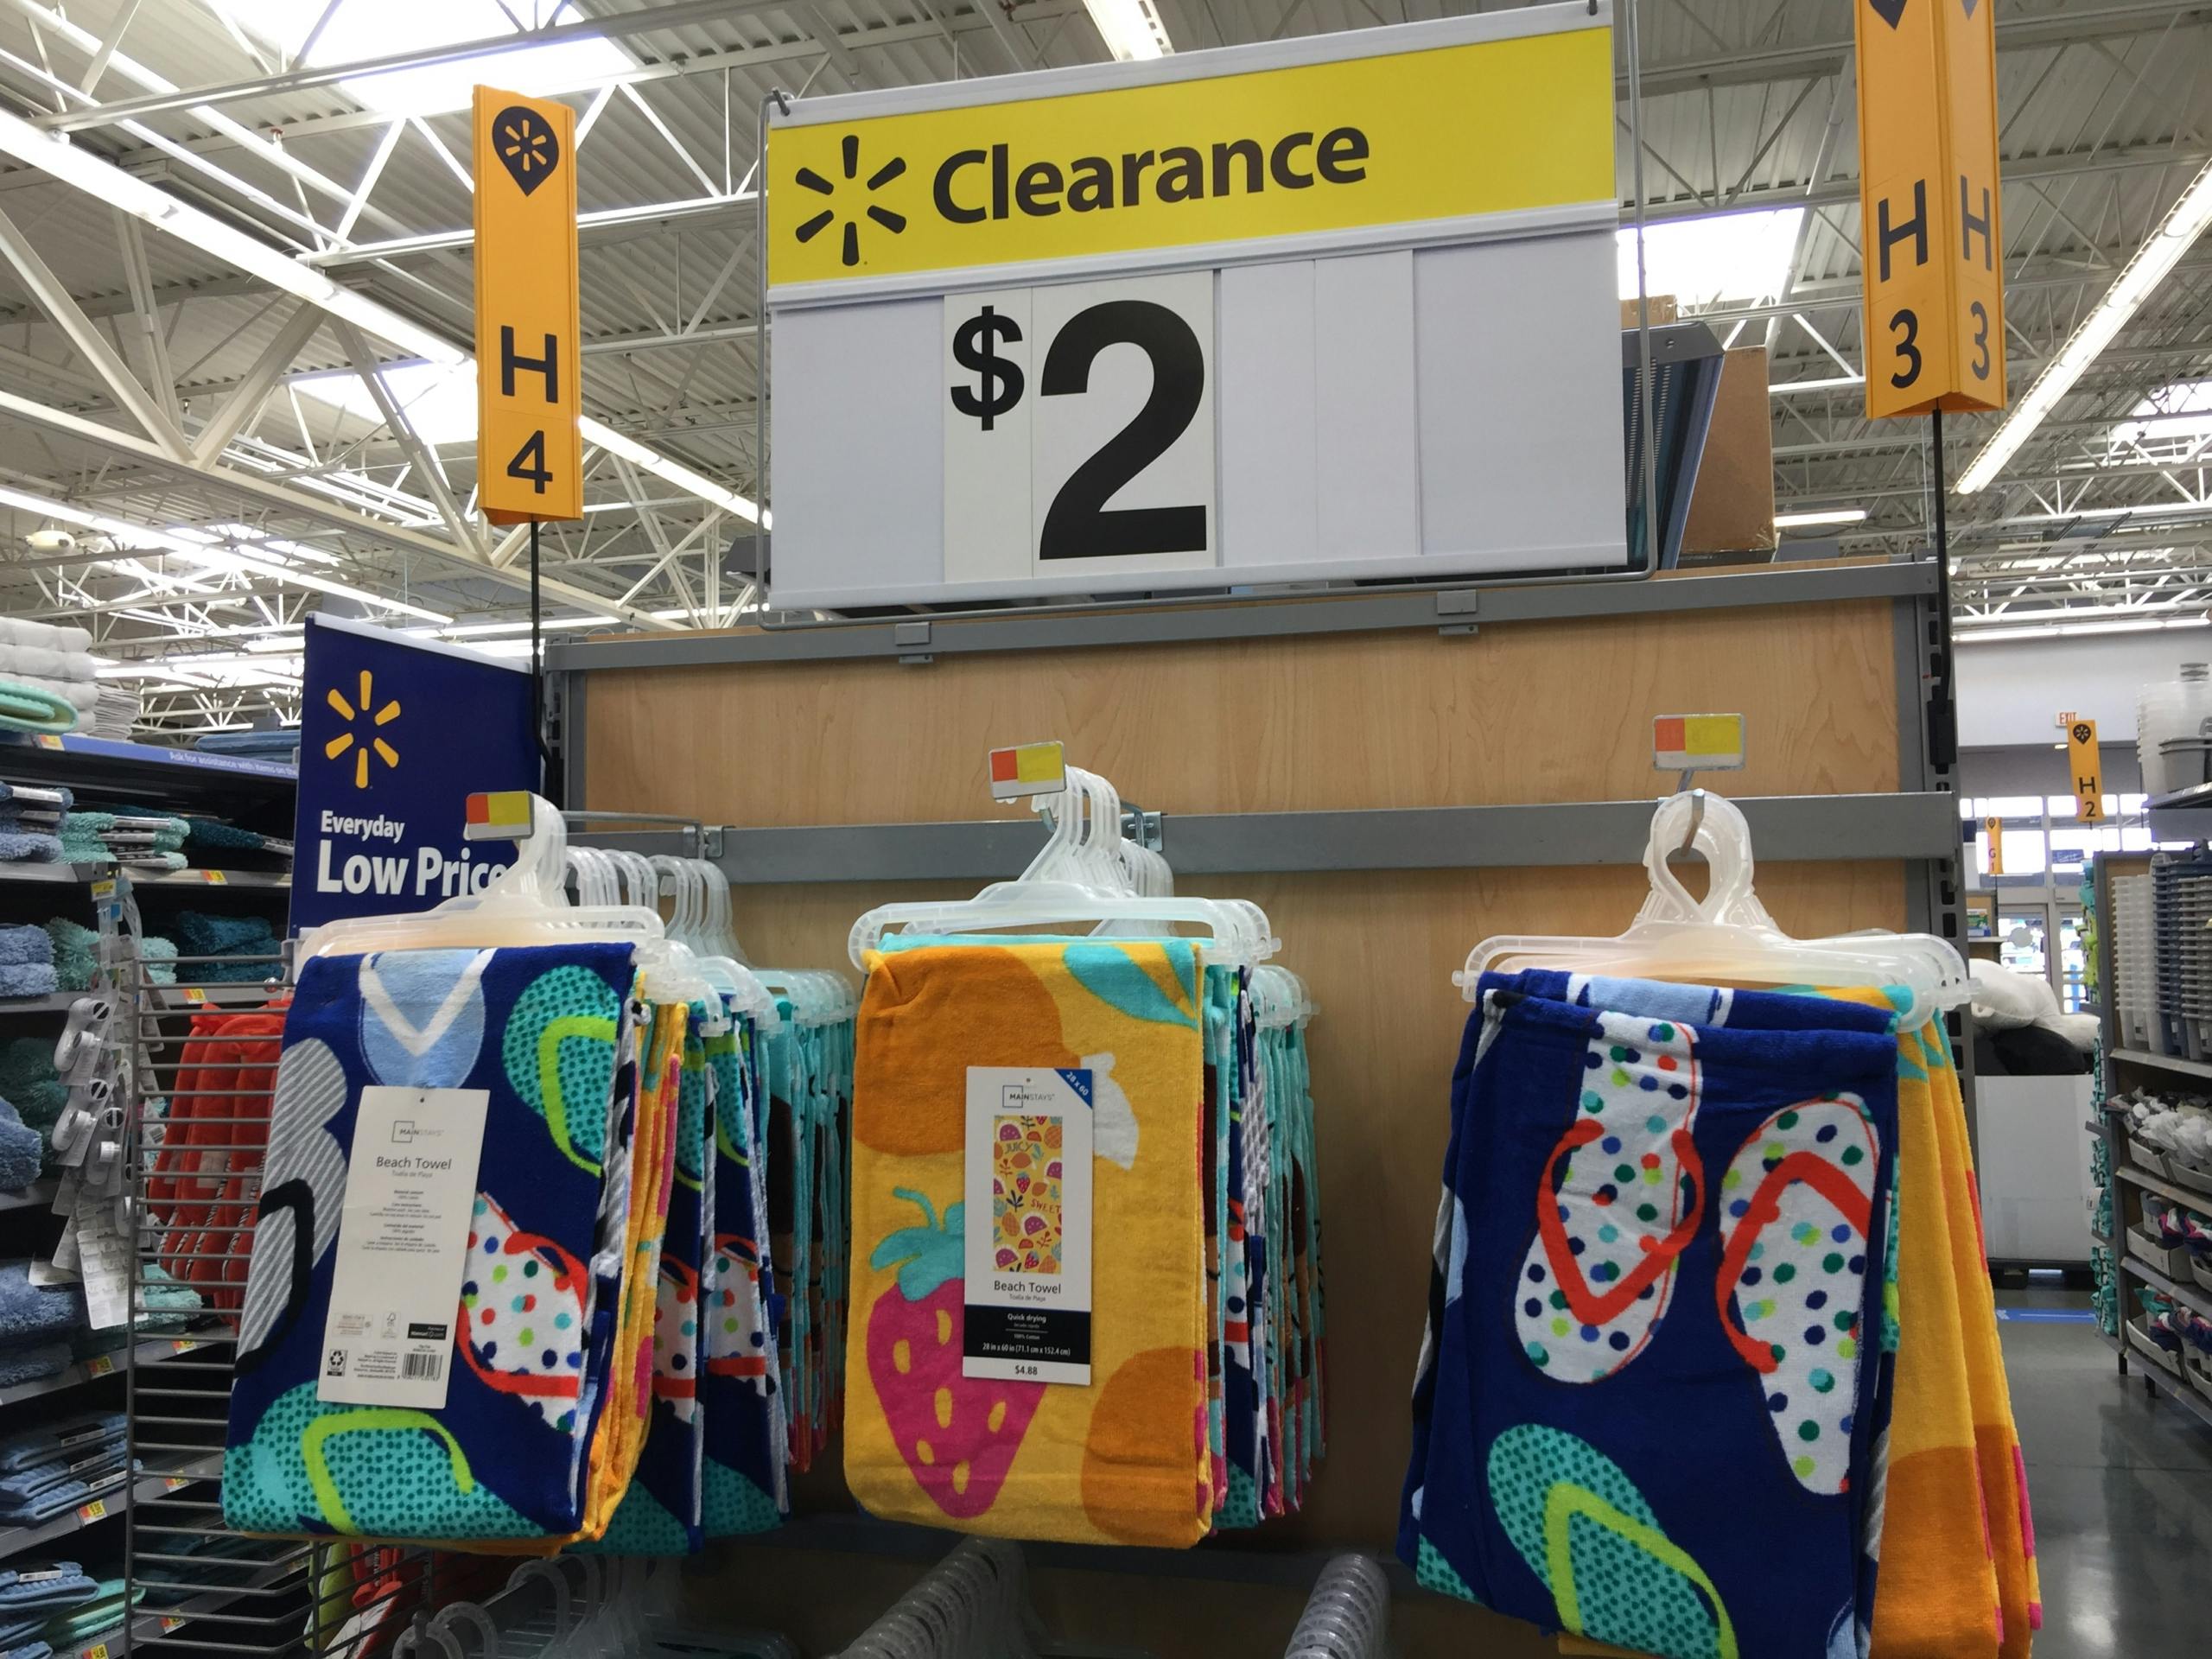 jcpenney clearance beach towels